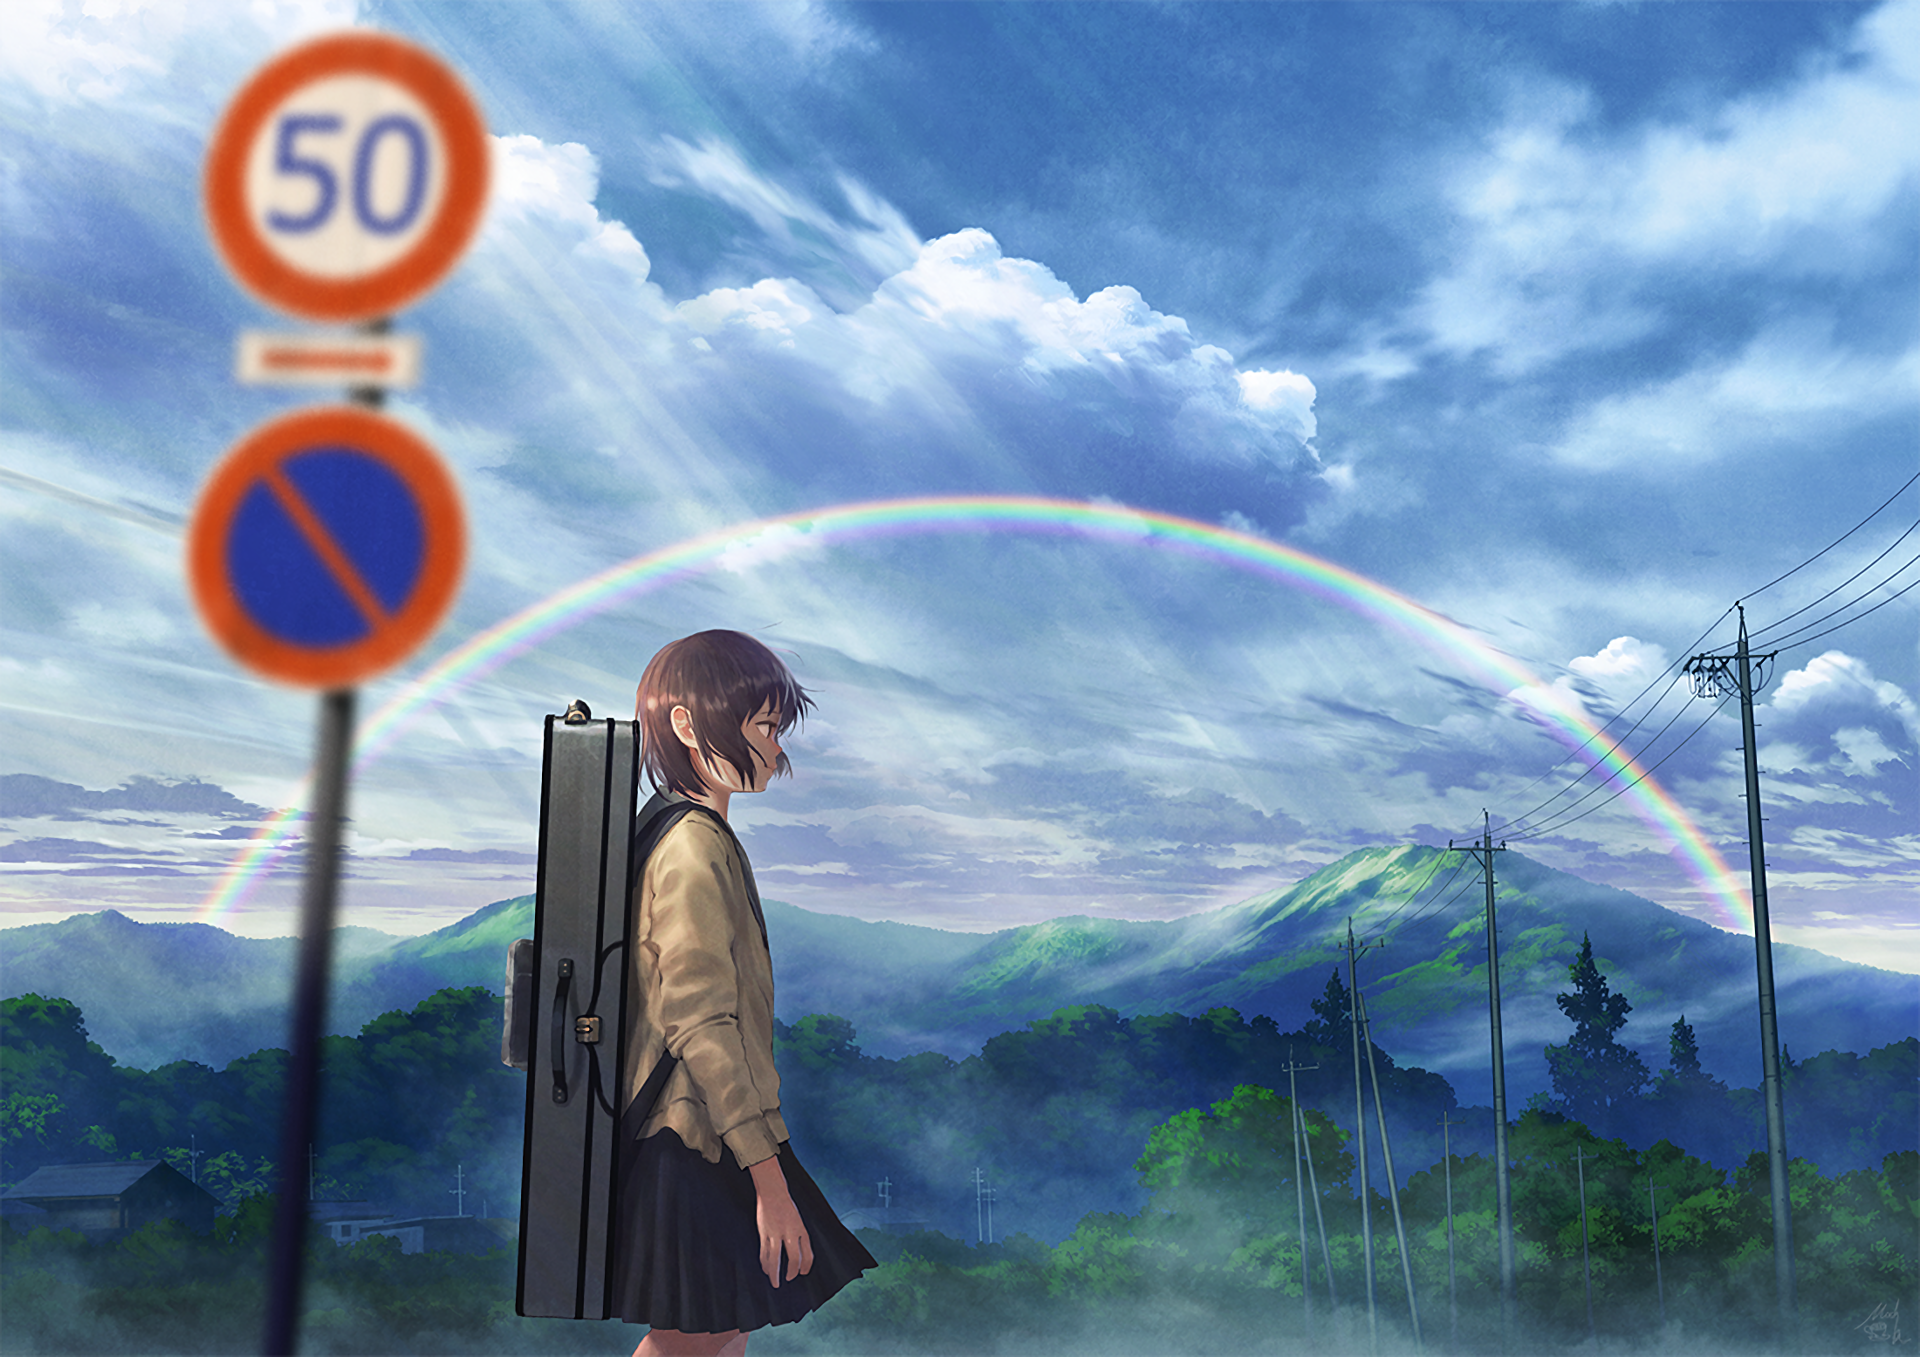 Anime Anime Girls Sign Landscape Numbers Mountains Outdoors Sky Moescape 1920x1357